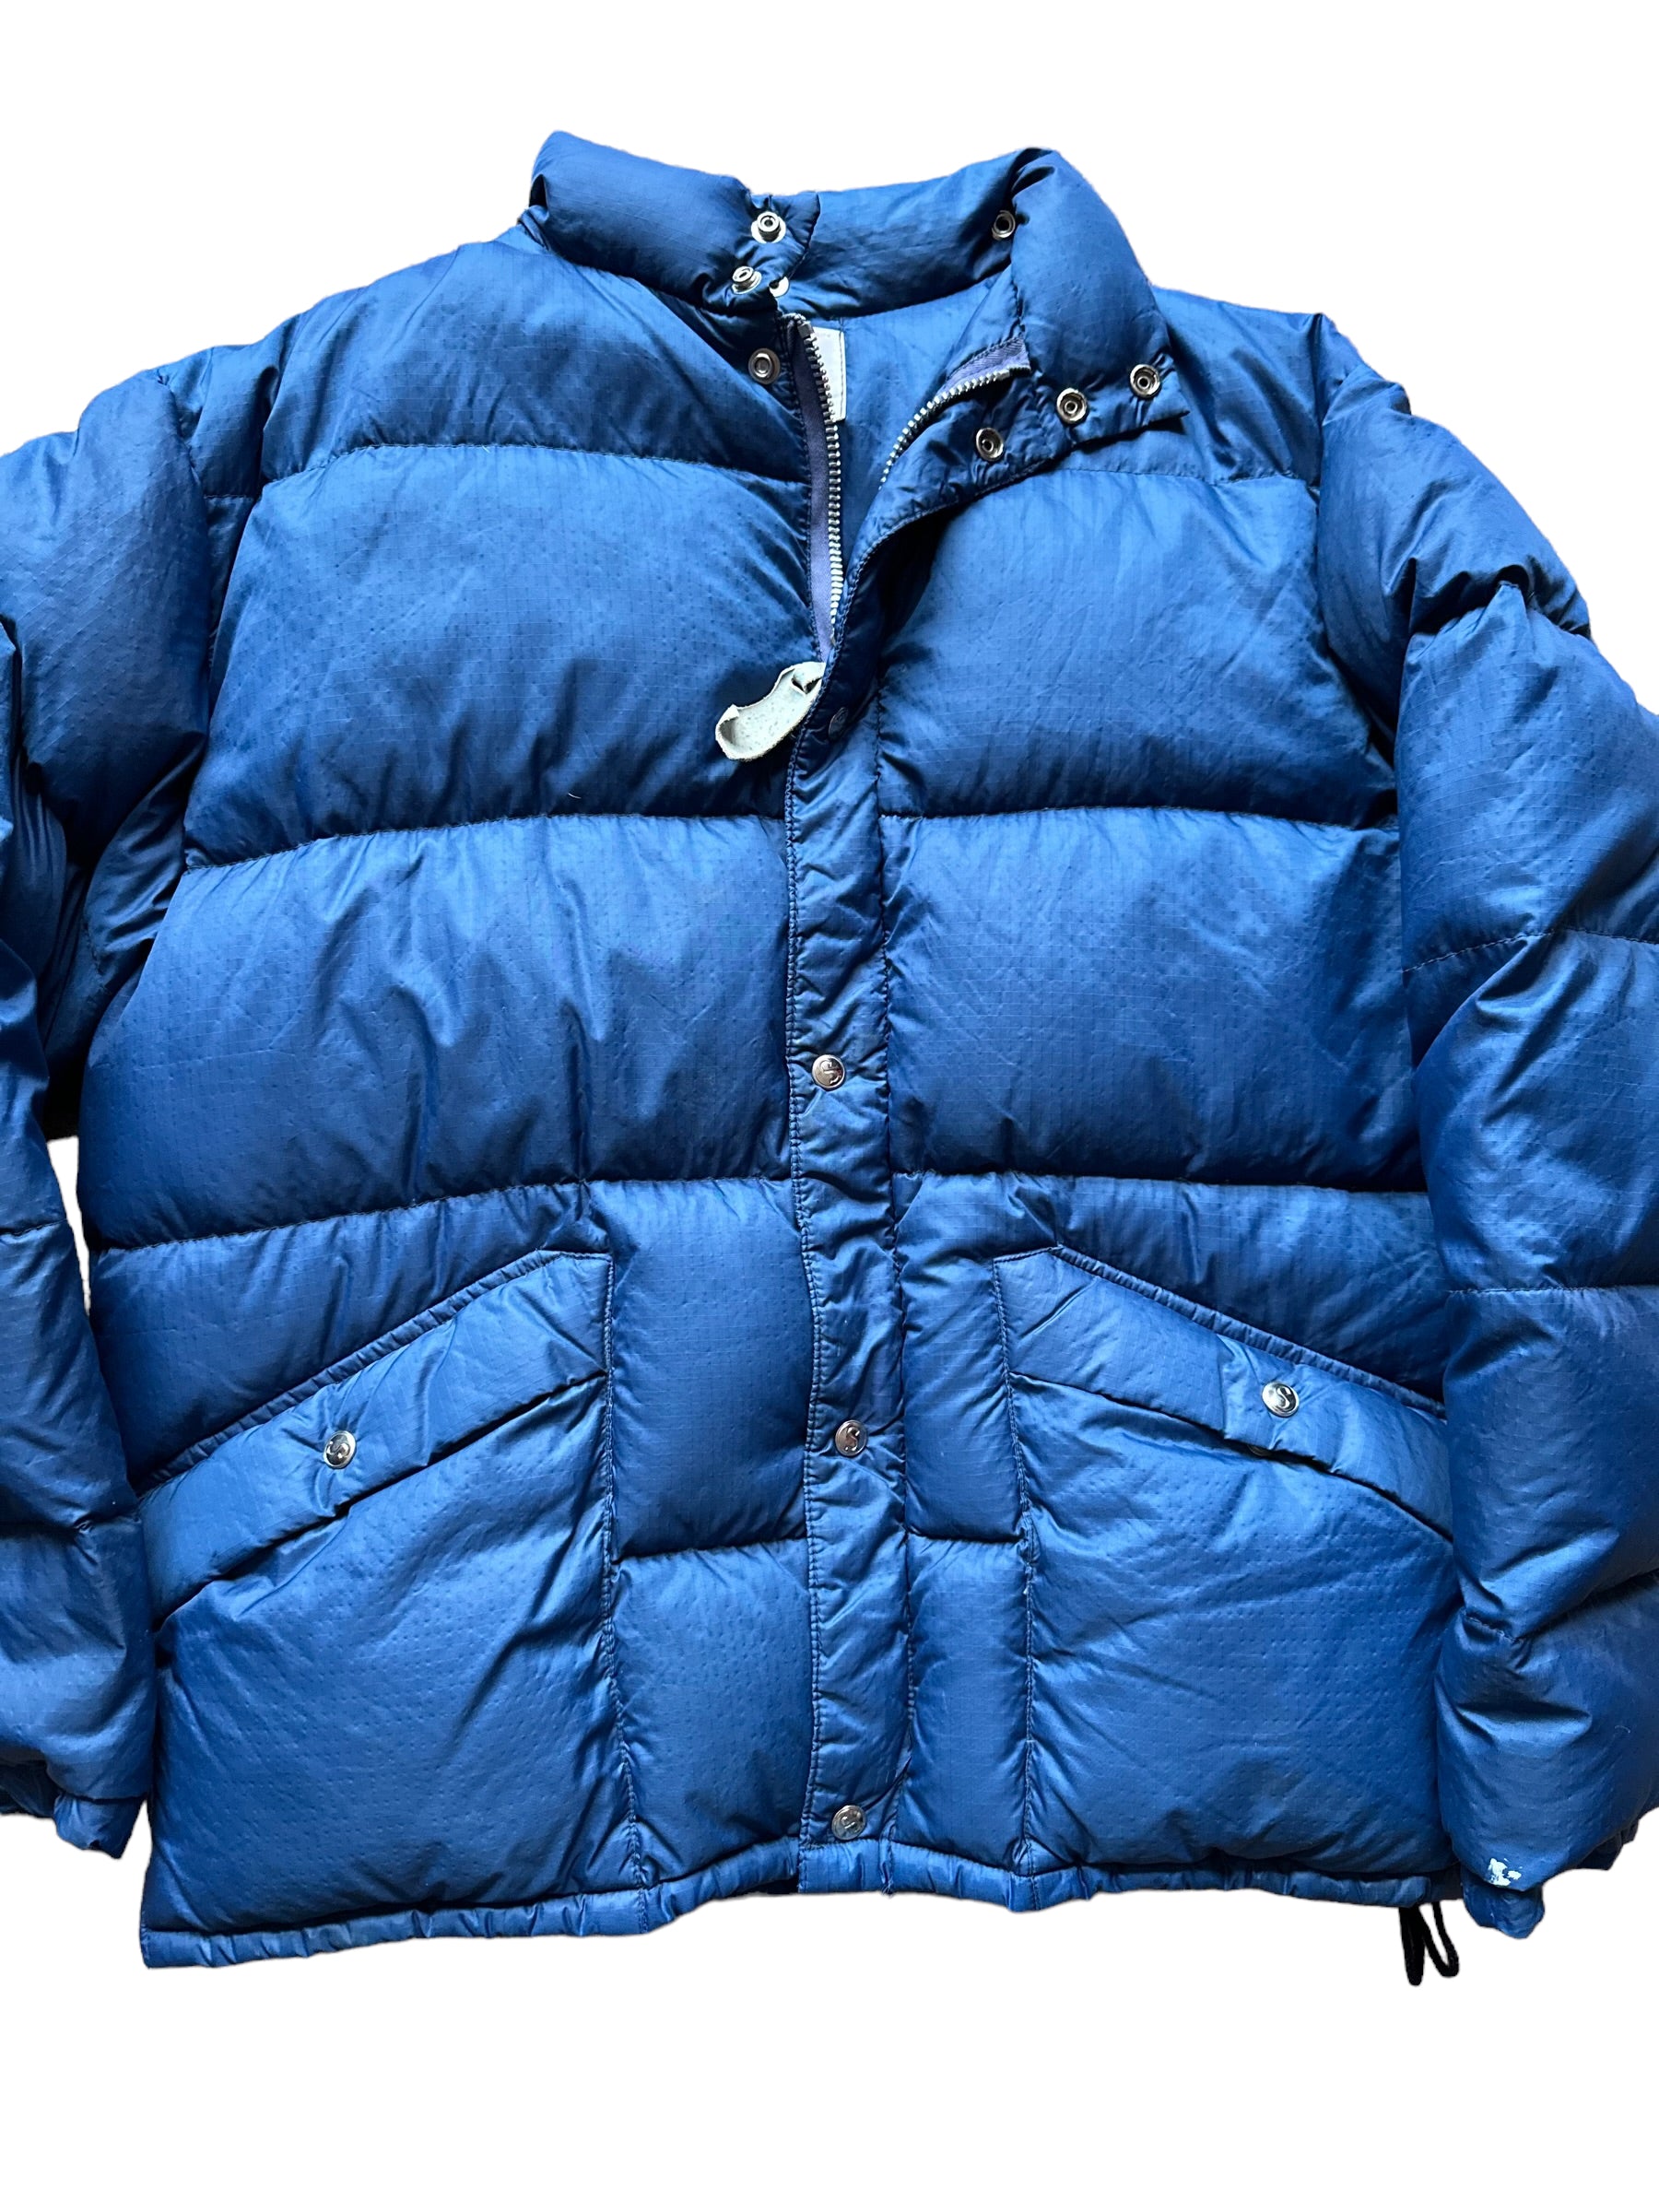 Close Up of Front View on Vintage Sprung Blue Goose Down Puffer Jacket SZ XL | Vintage Puffer Jacket Seattle | Barn Owl Vintage Seattle